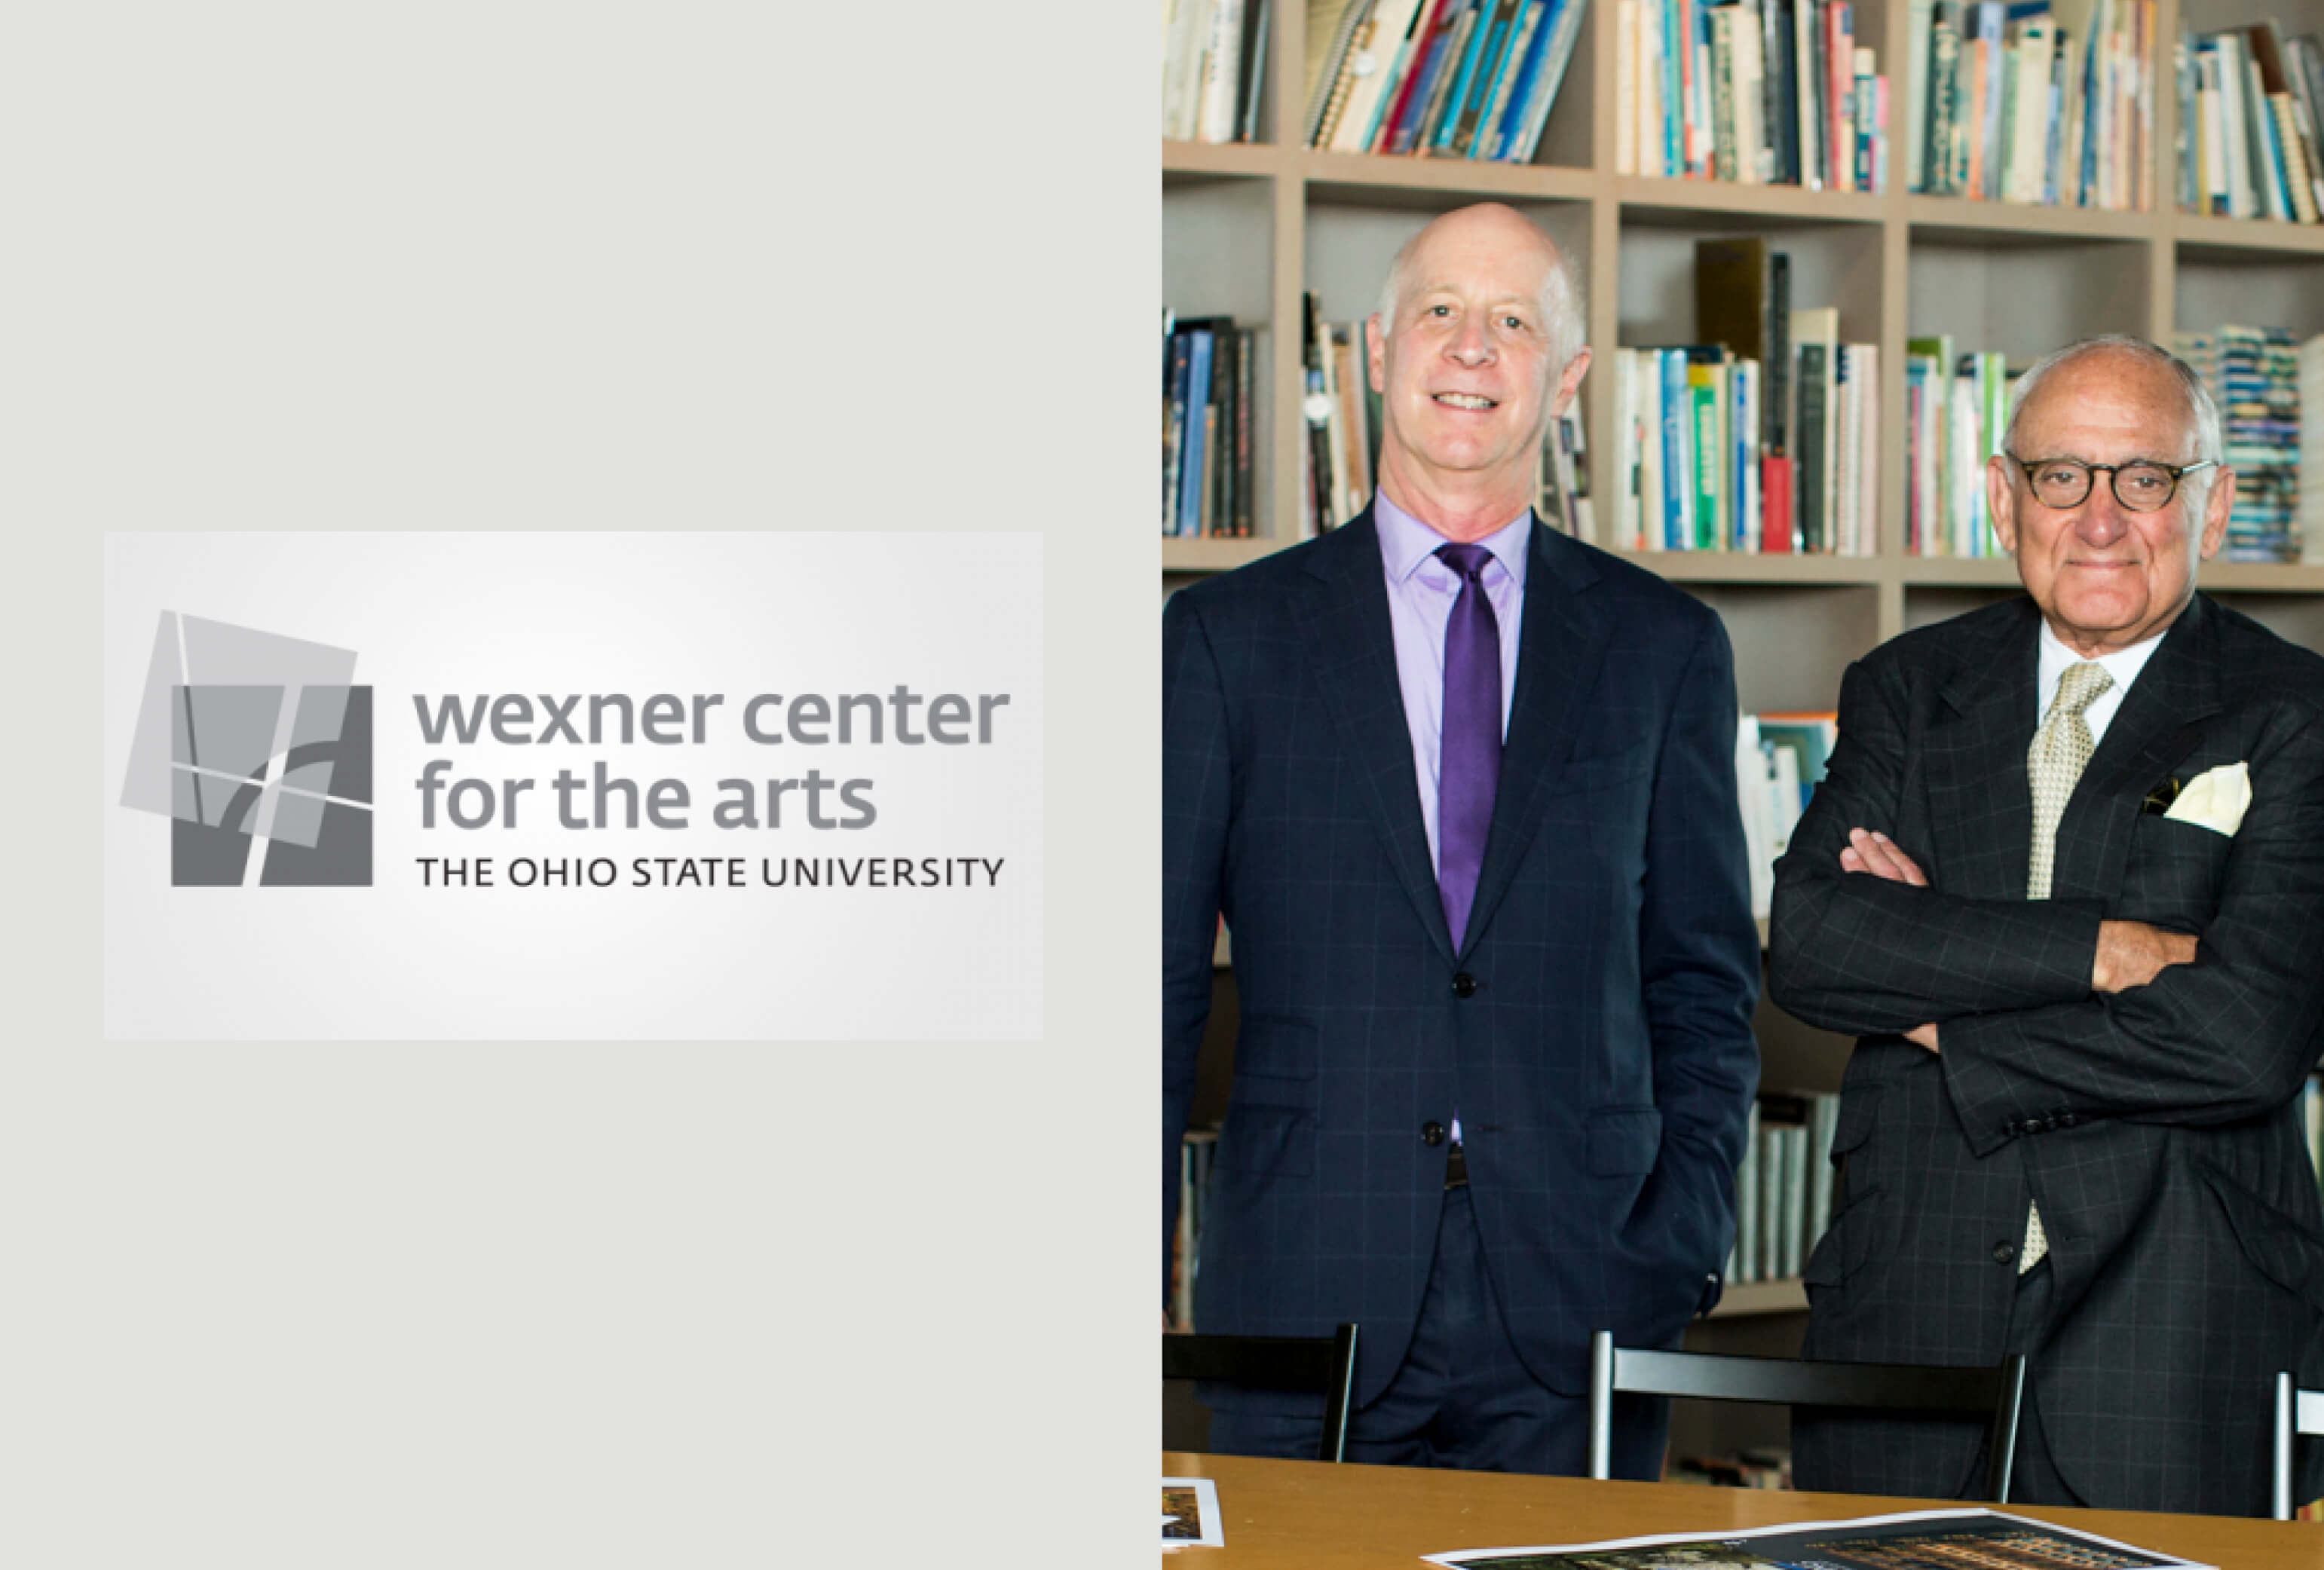 Robert A.M. Stern in Conversation with Paul Goldberger at the Wexner Center for the Arts